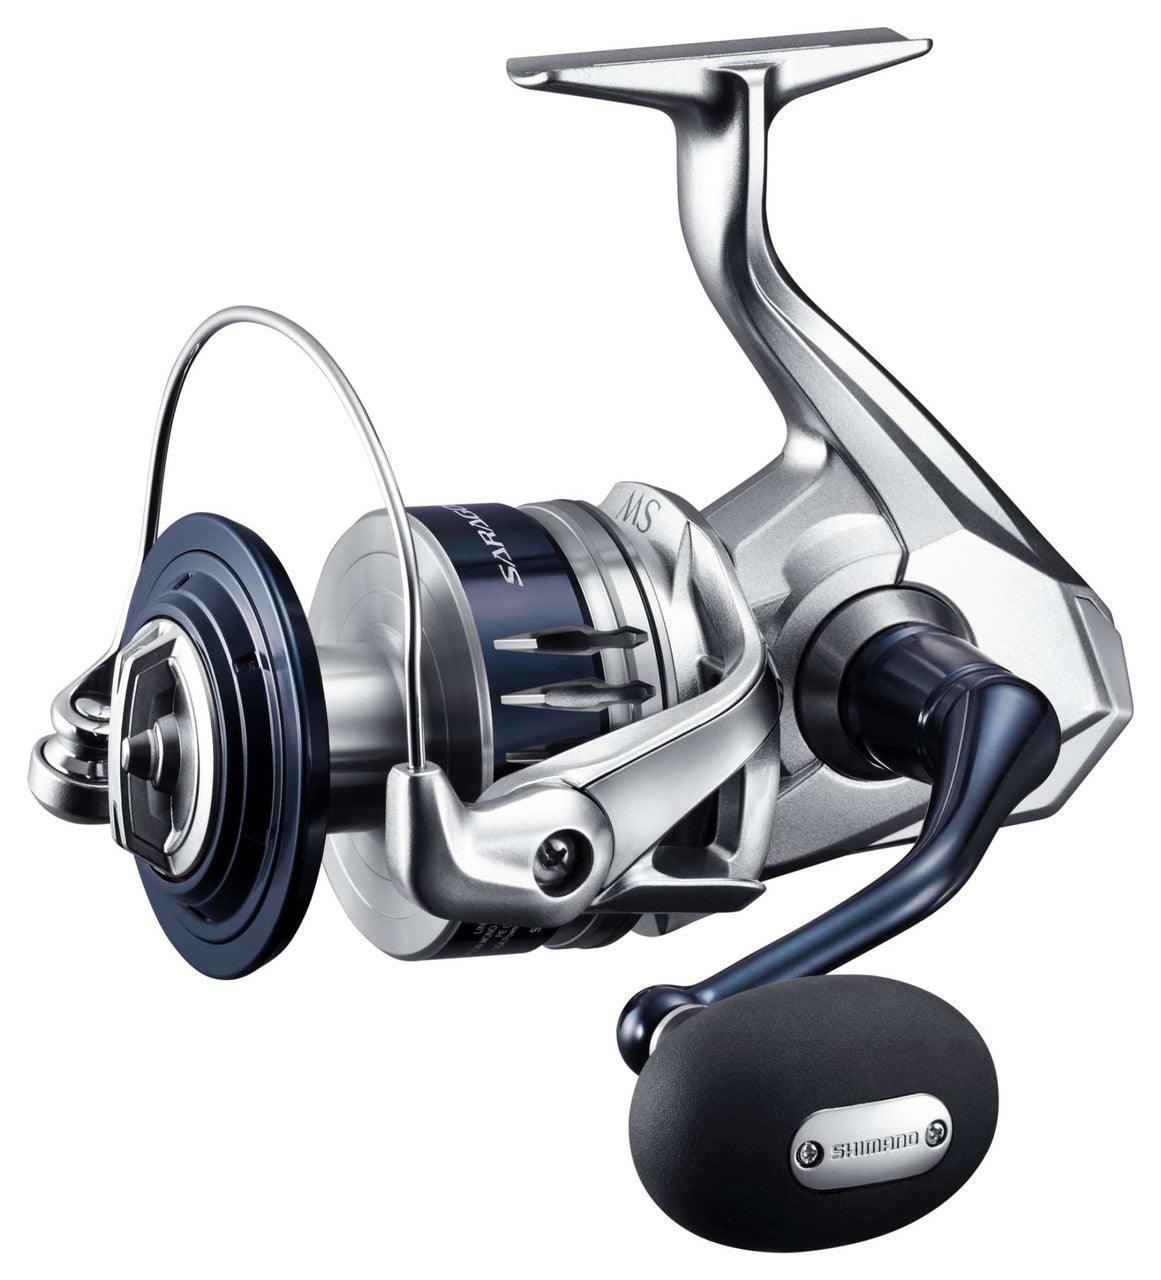 Saragosa SW 5000 is one of our latest additions to the Offshore Spinning  line up dedicated to the Blue Water angler.